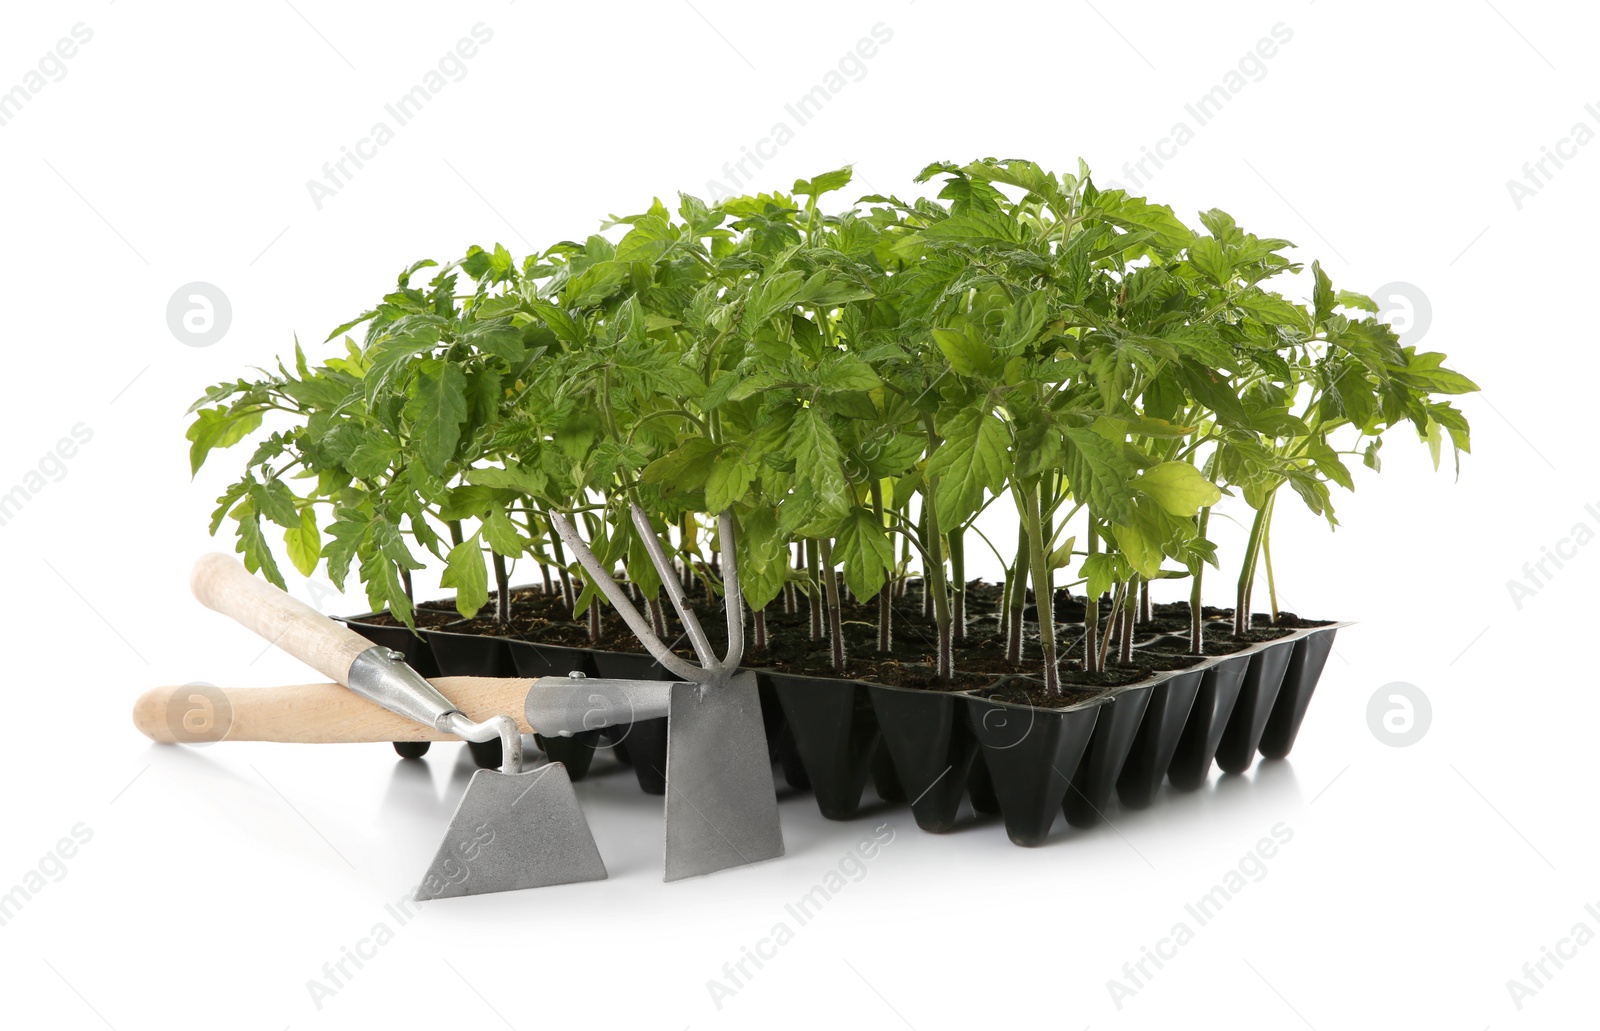 Photo of Gardening tools and green tomato plants in seedling tray isolated on white